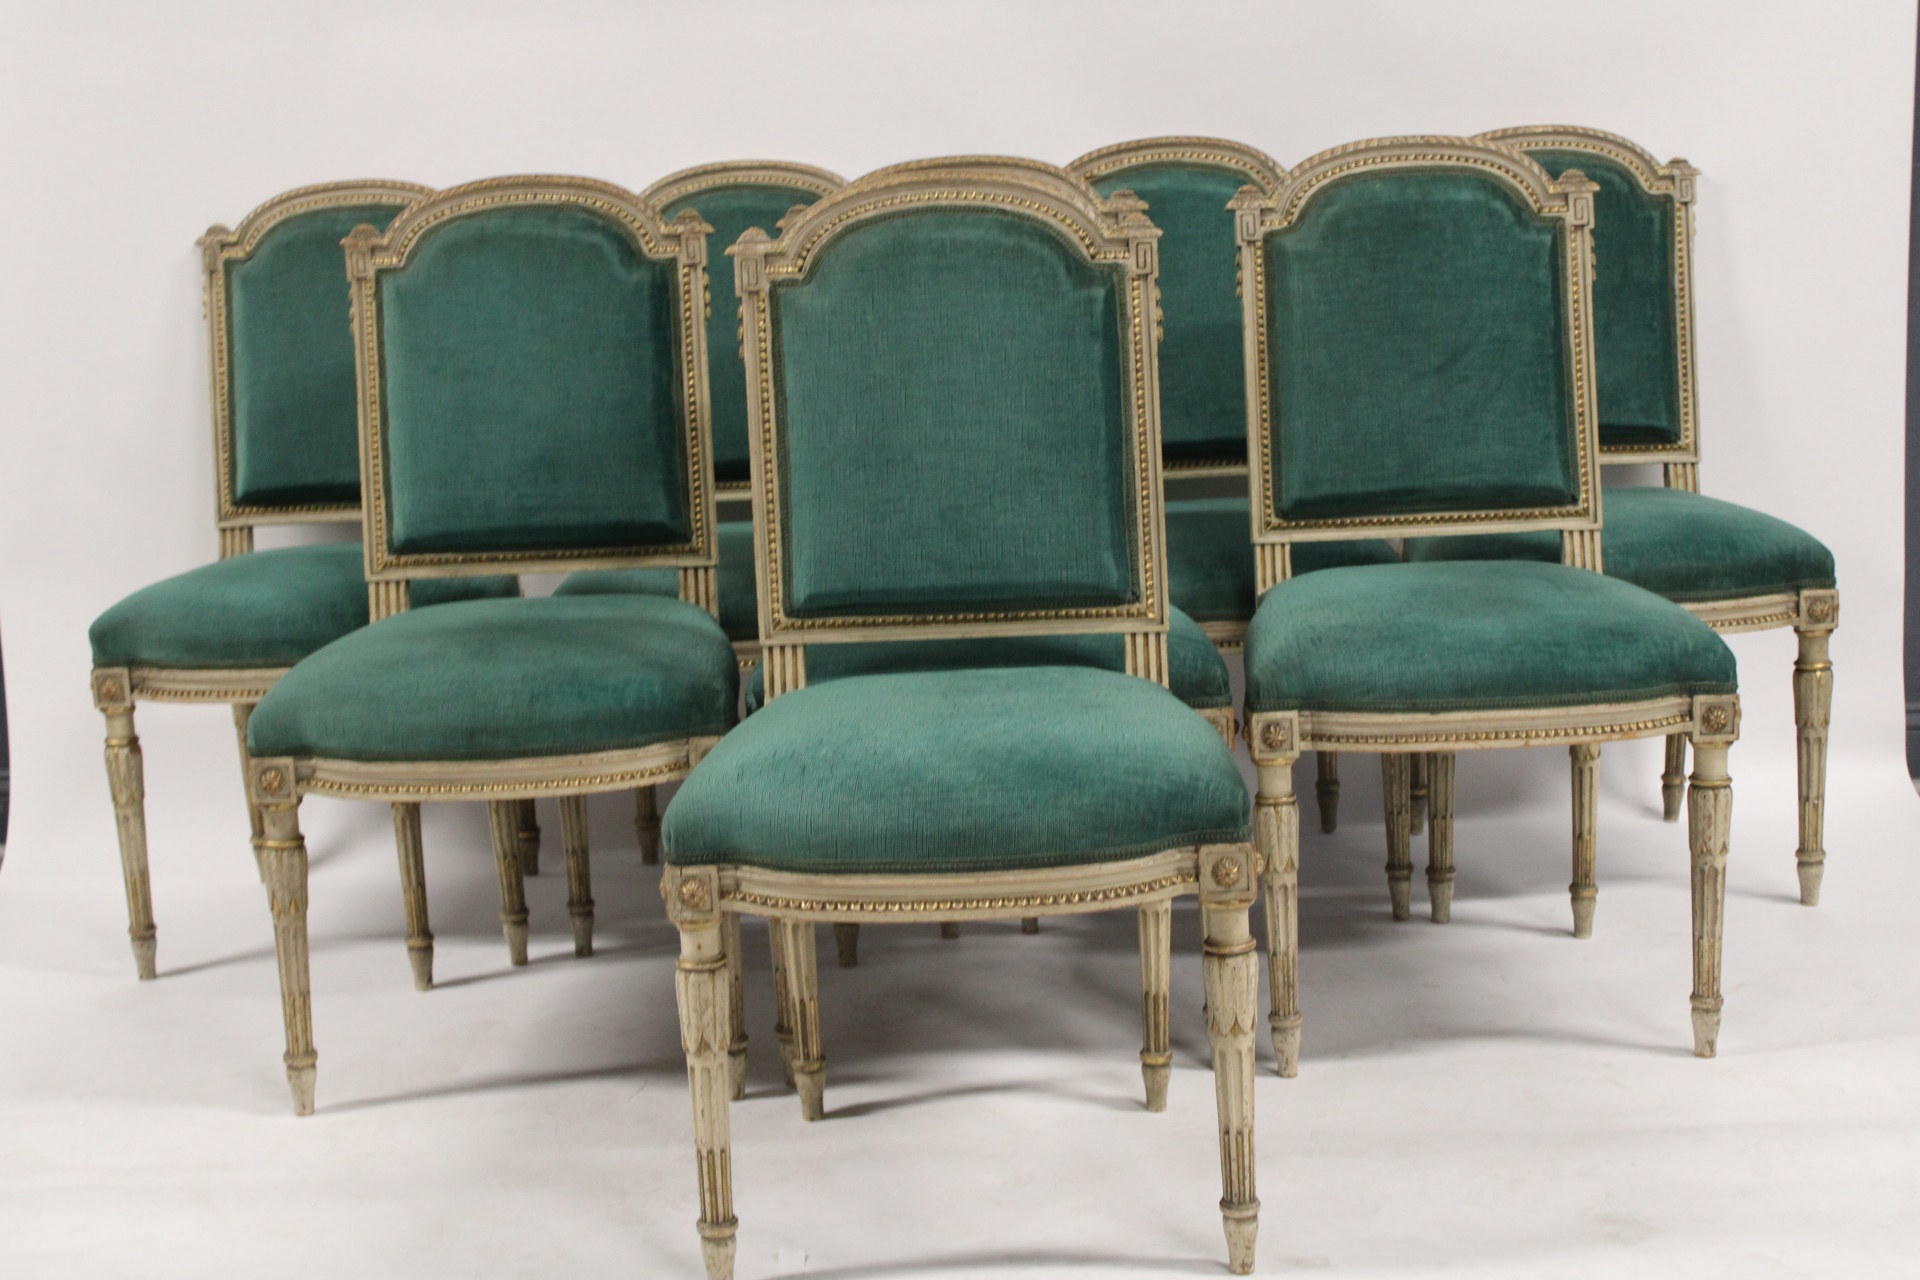 8 FINE CARVED, PAINT & GILT DECORATED